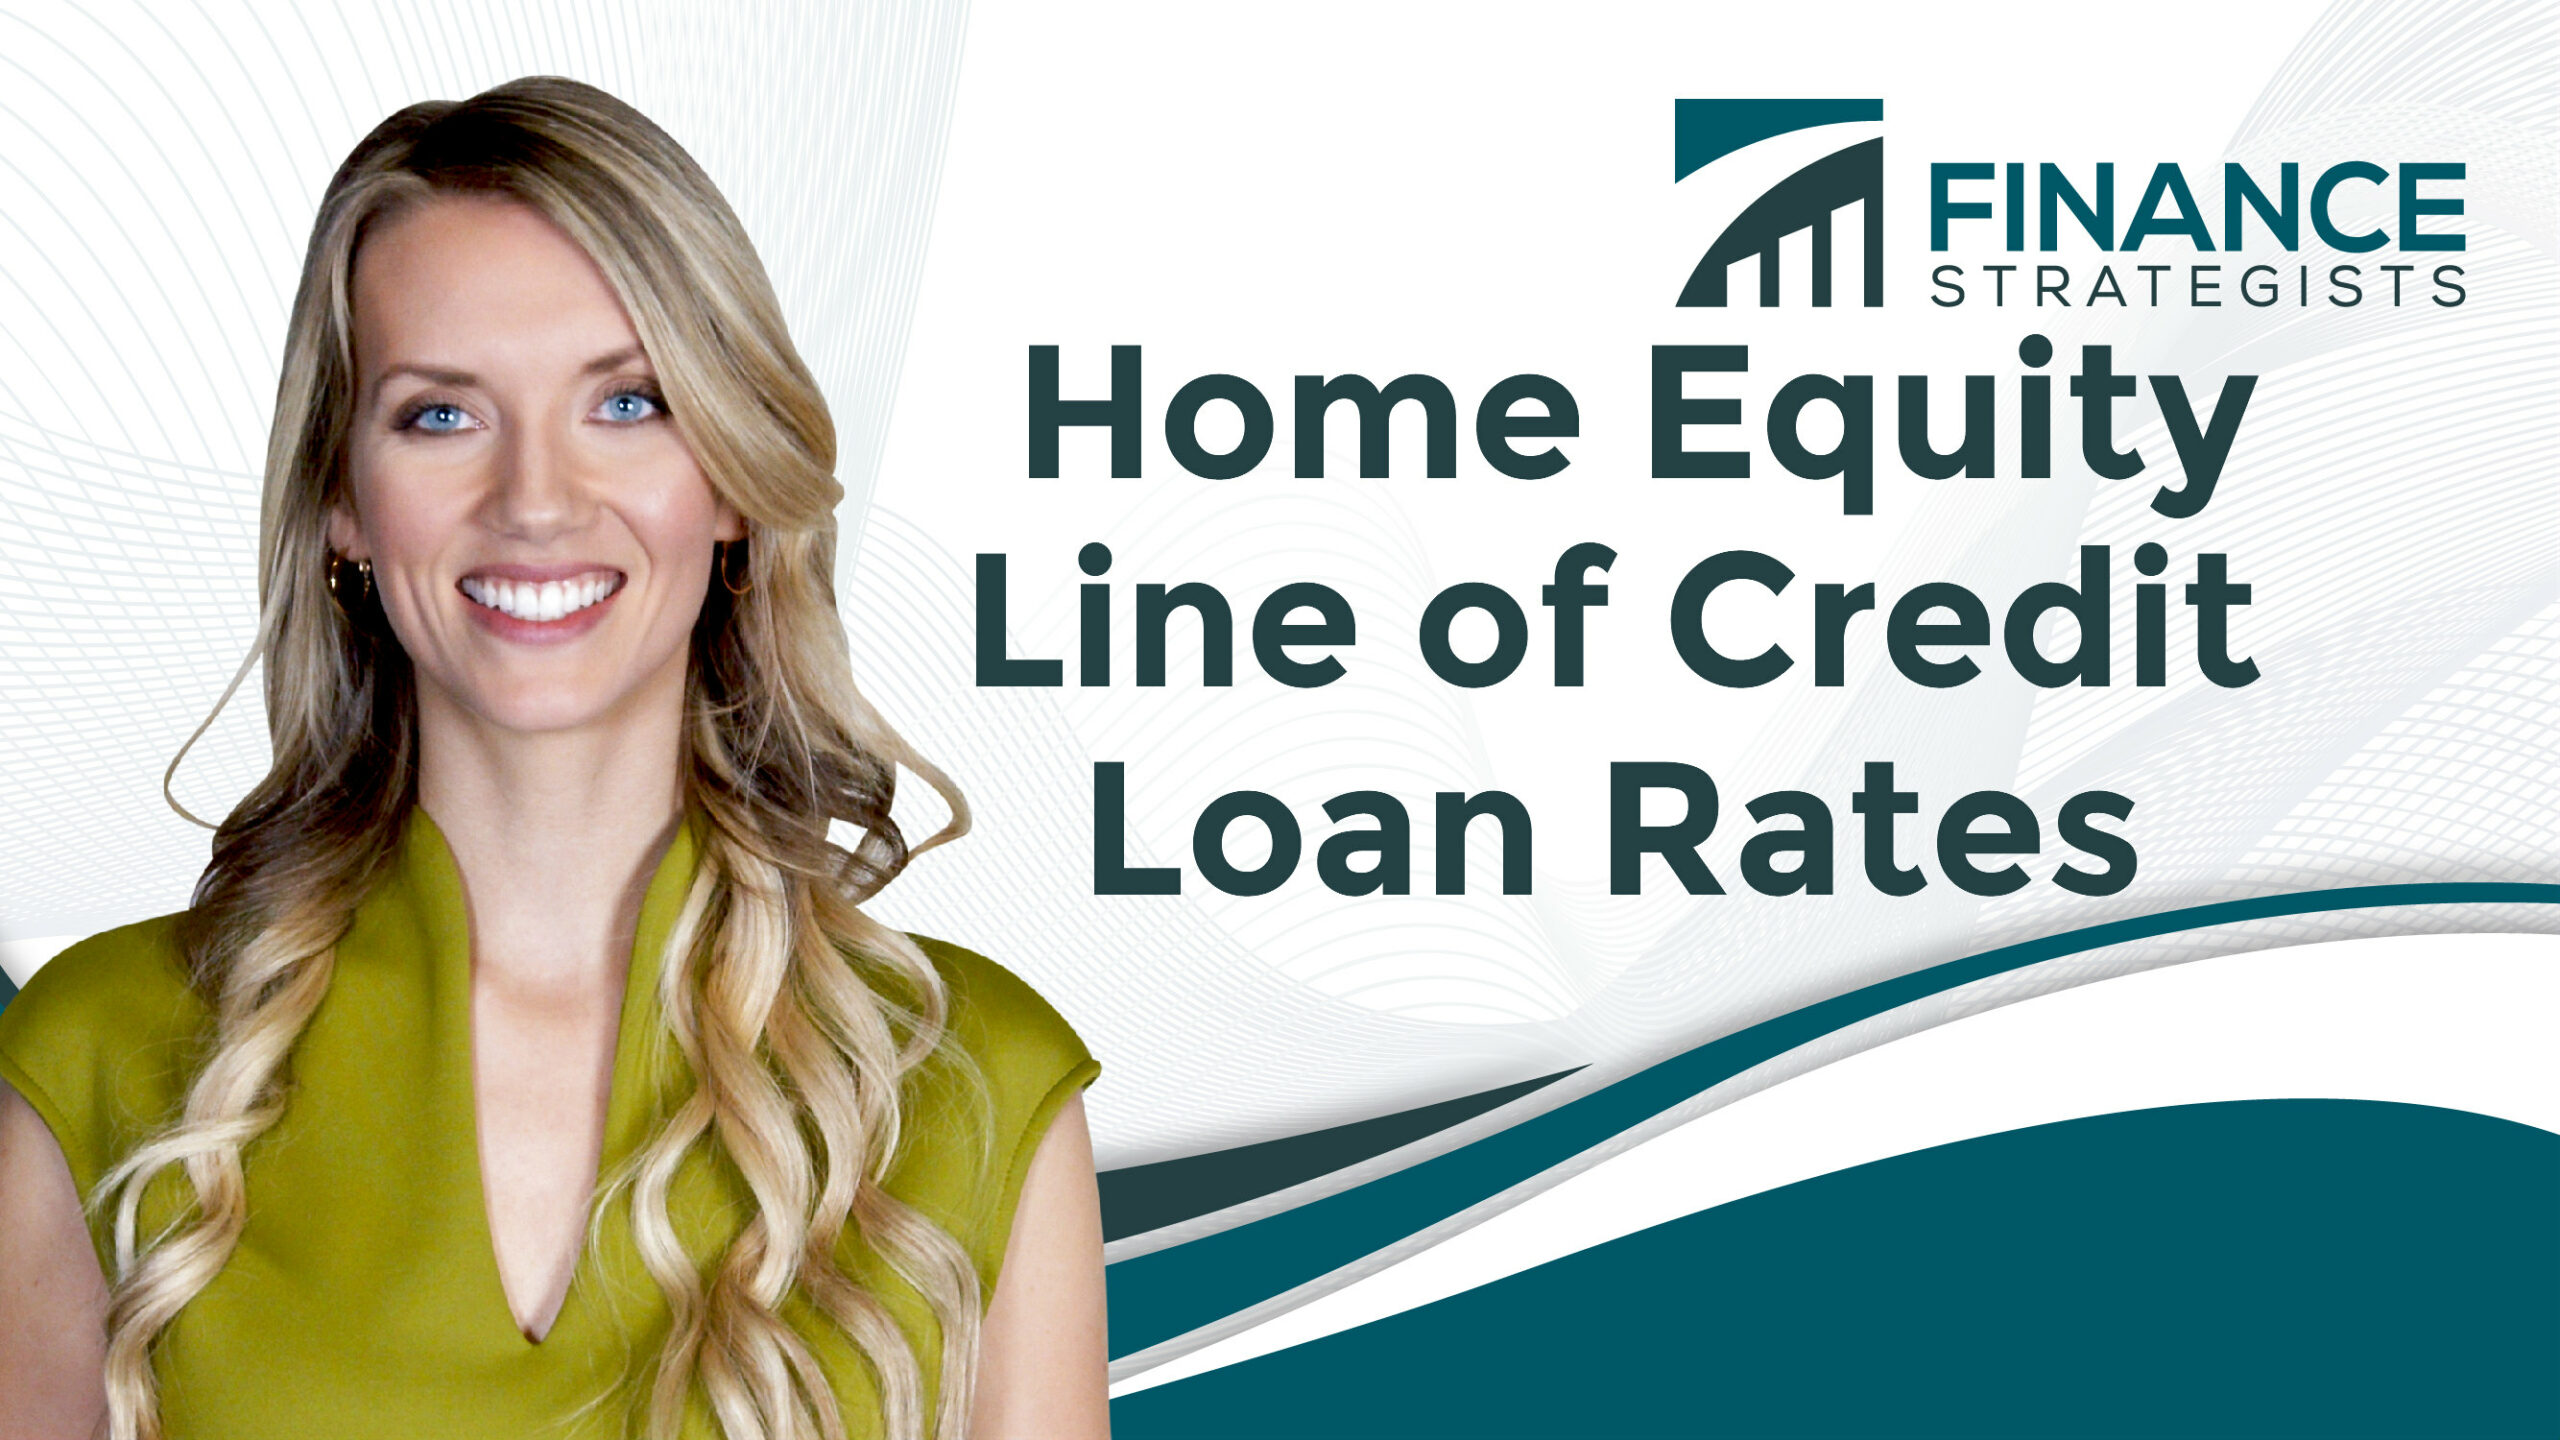 Home Equity Line of Credit Loan Rates Finance Strategists